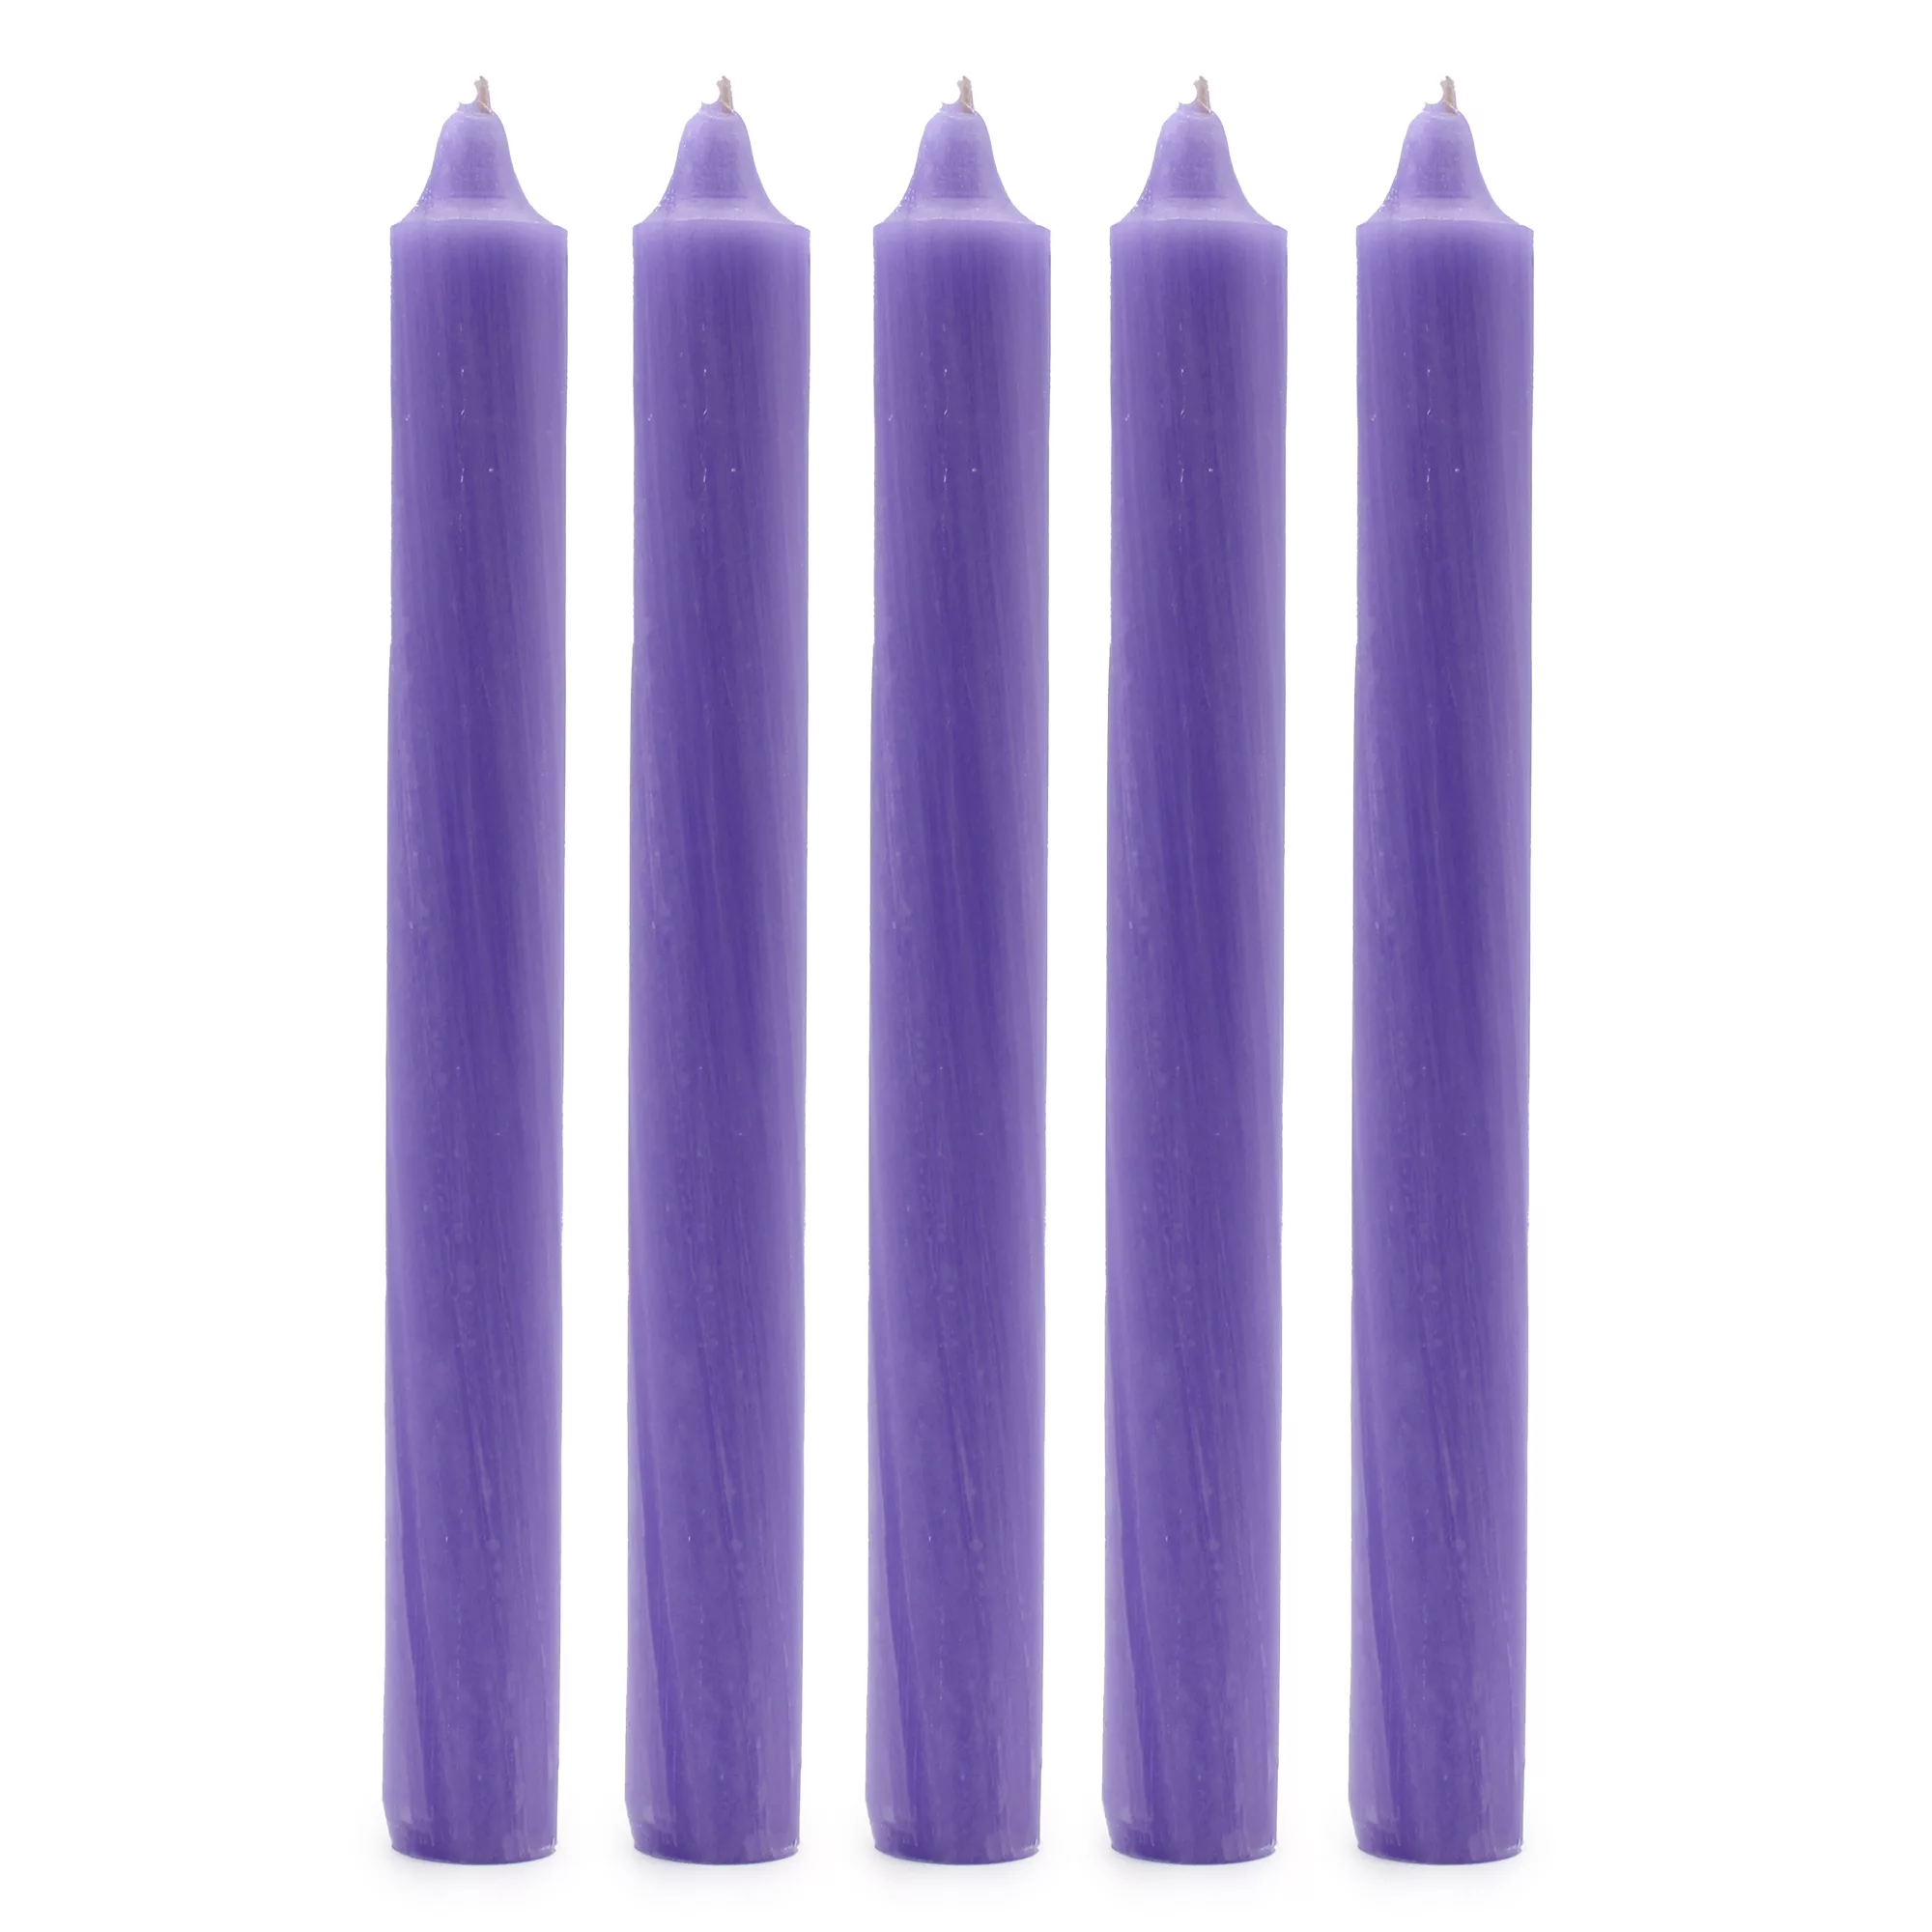 Solid Colour Dinner Candles – Rustic Lilac – Pack of 5